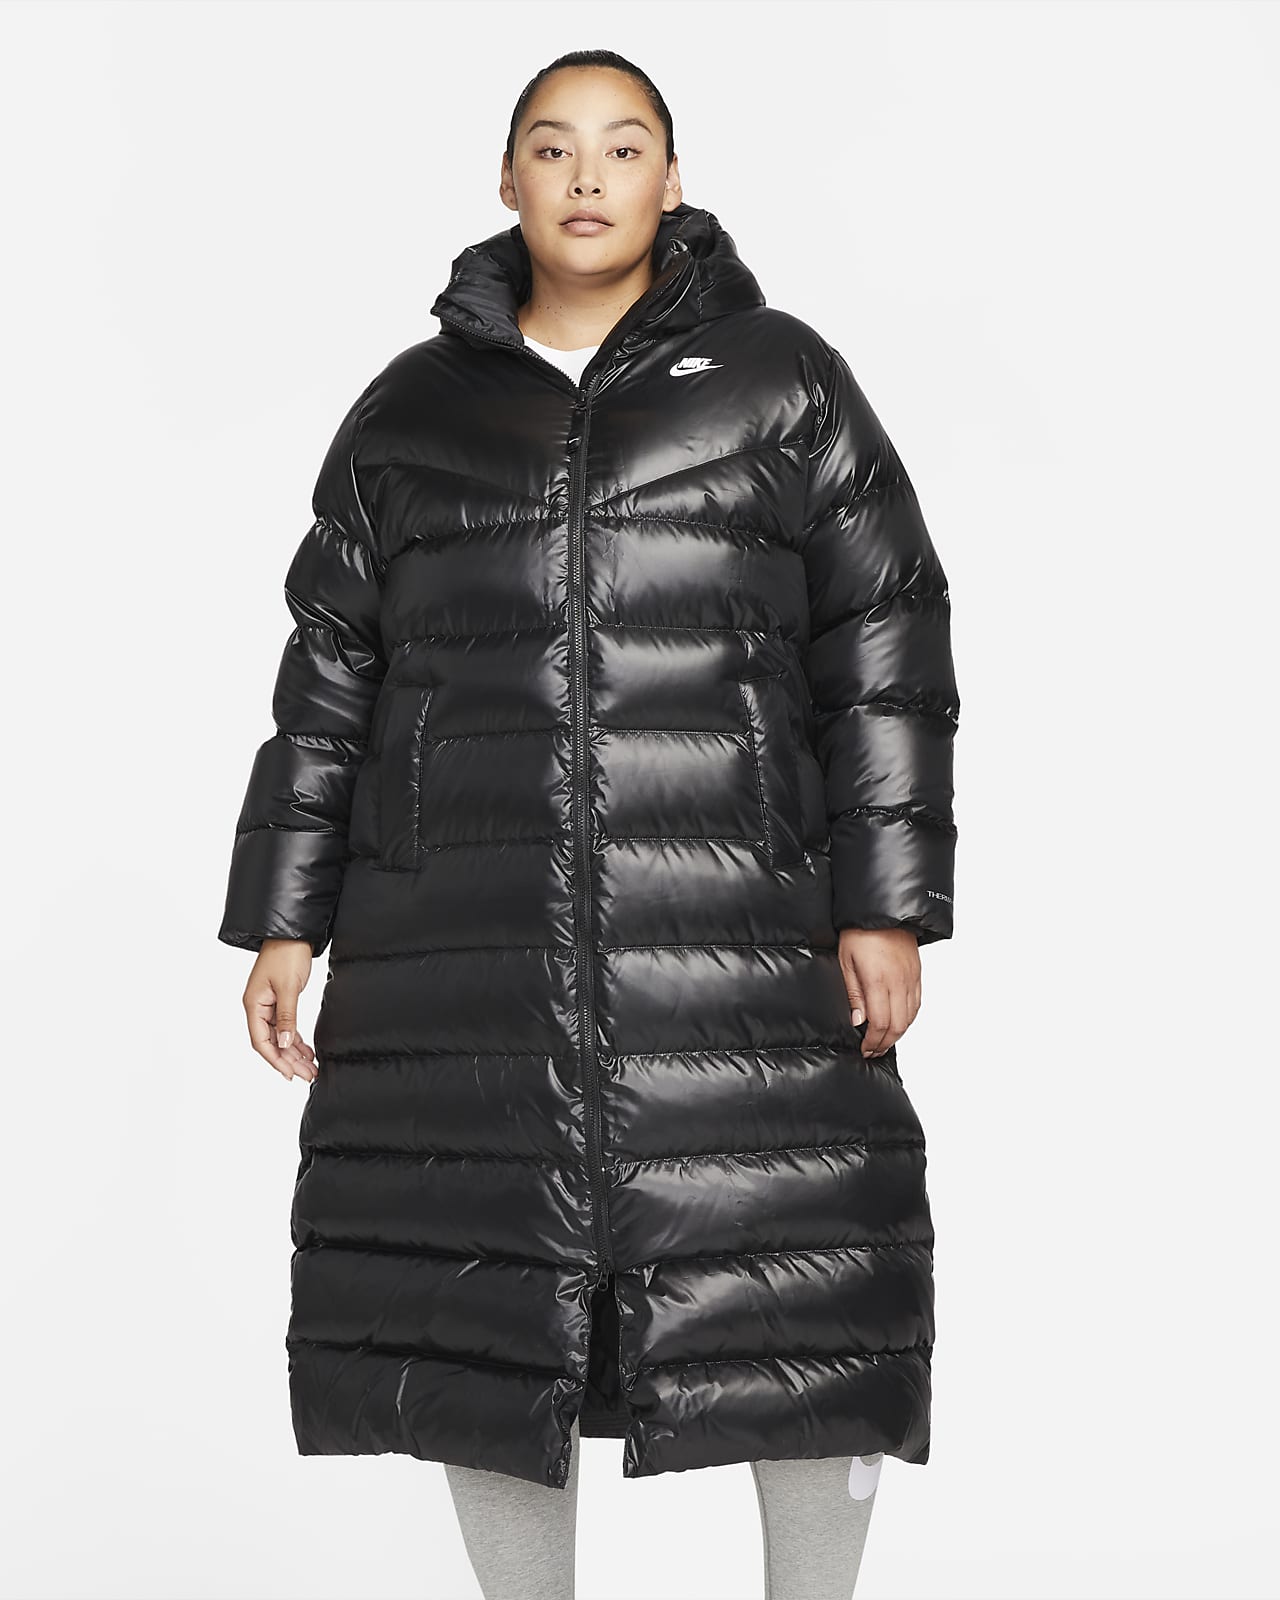 nike plus size winter coats & jackets for Sale,Up To OFF54%